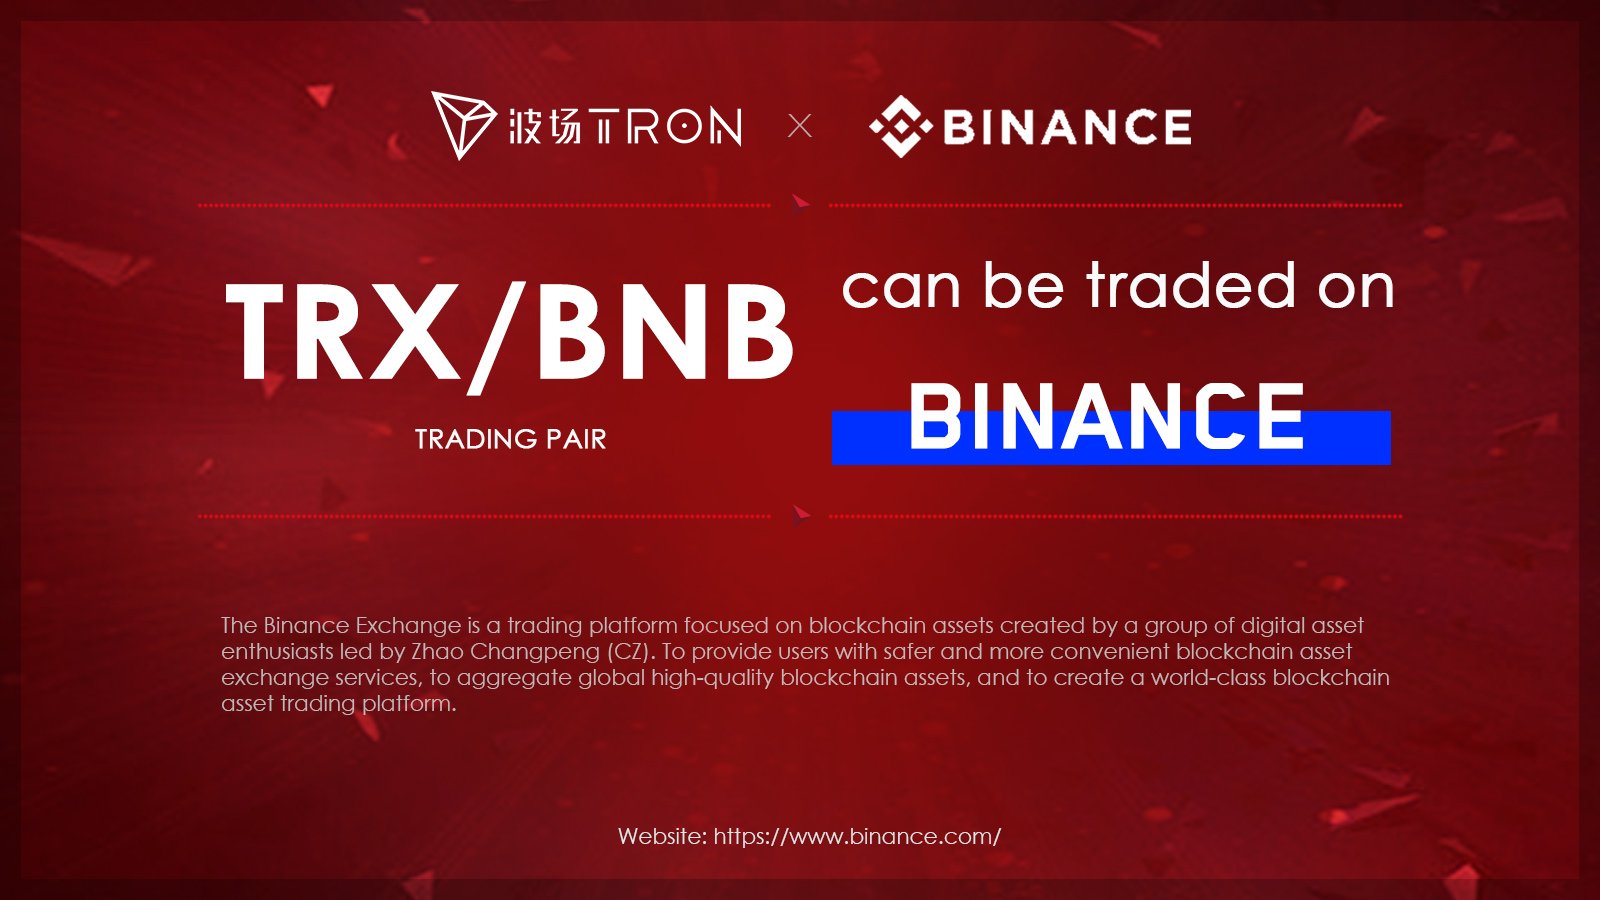  binance trx bnb trading tron cryptocurrency announcement 